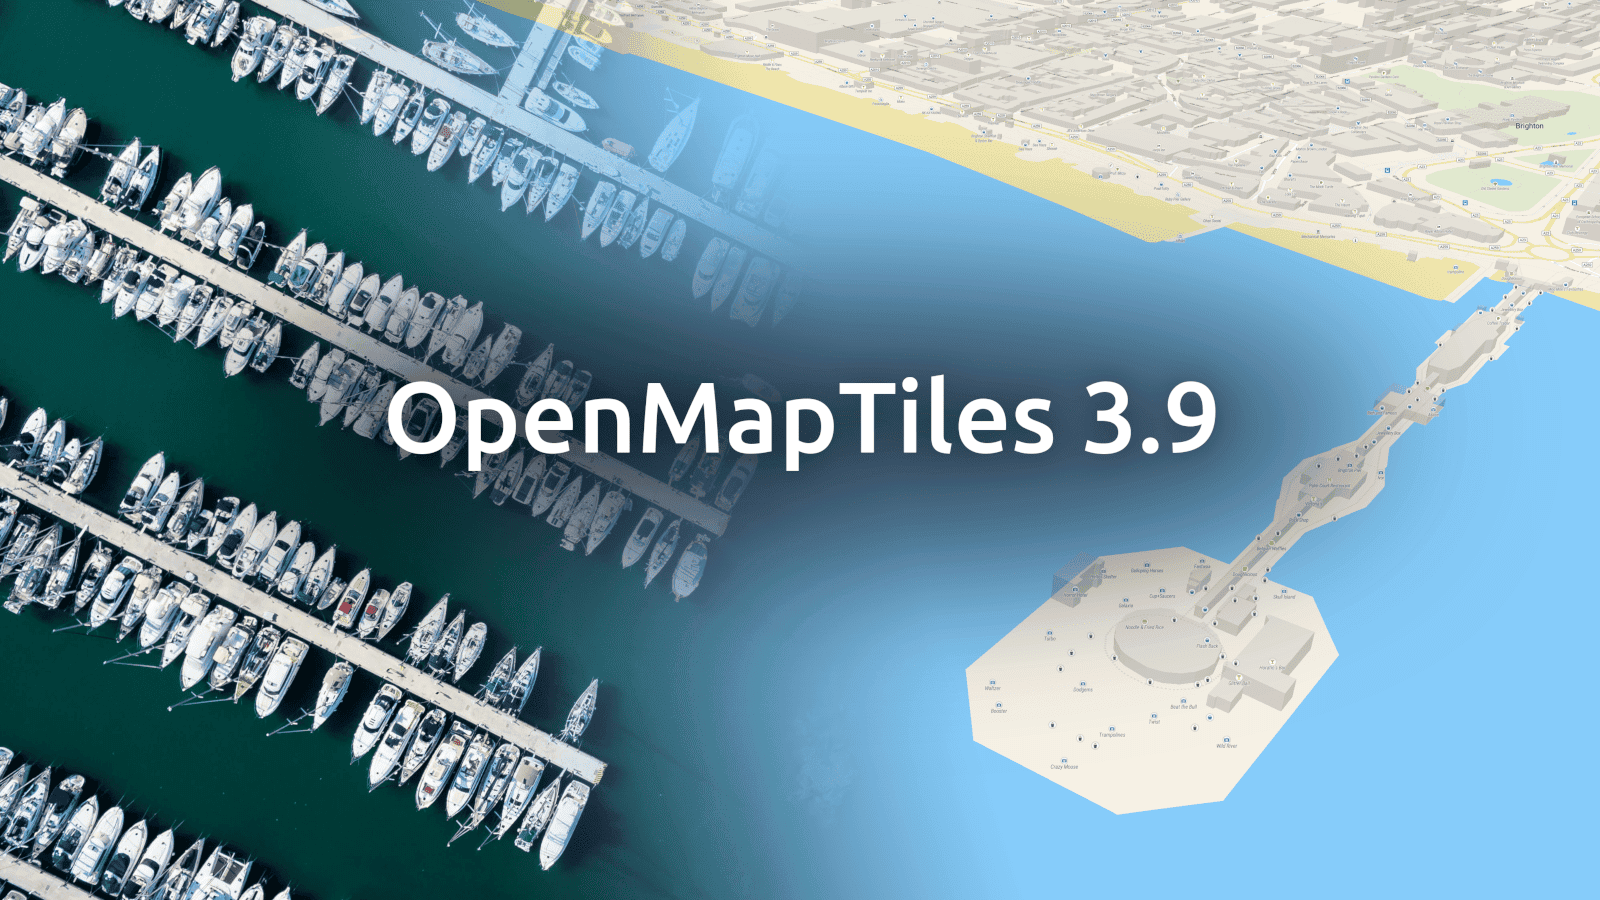 OpenMapTiles with docks and piers